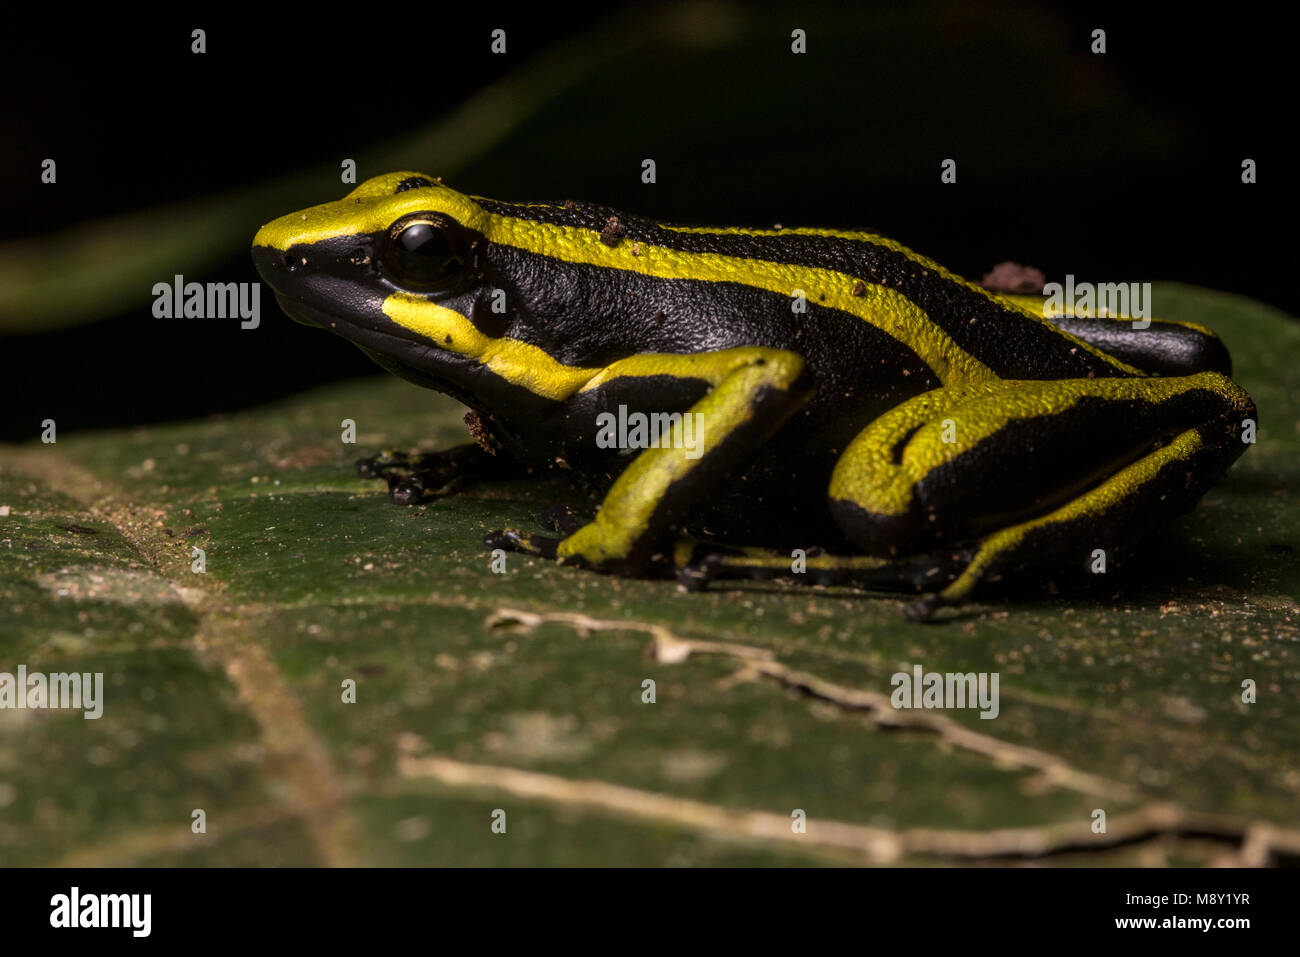 A brightly colored and toxic poison frog, Ameerega trivittata, from Peru. Stock Photo